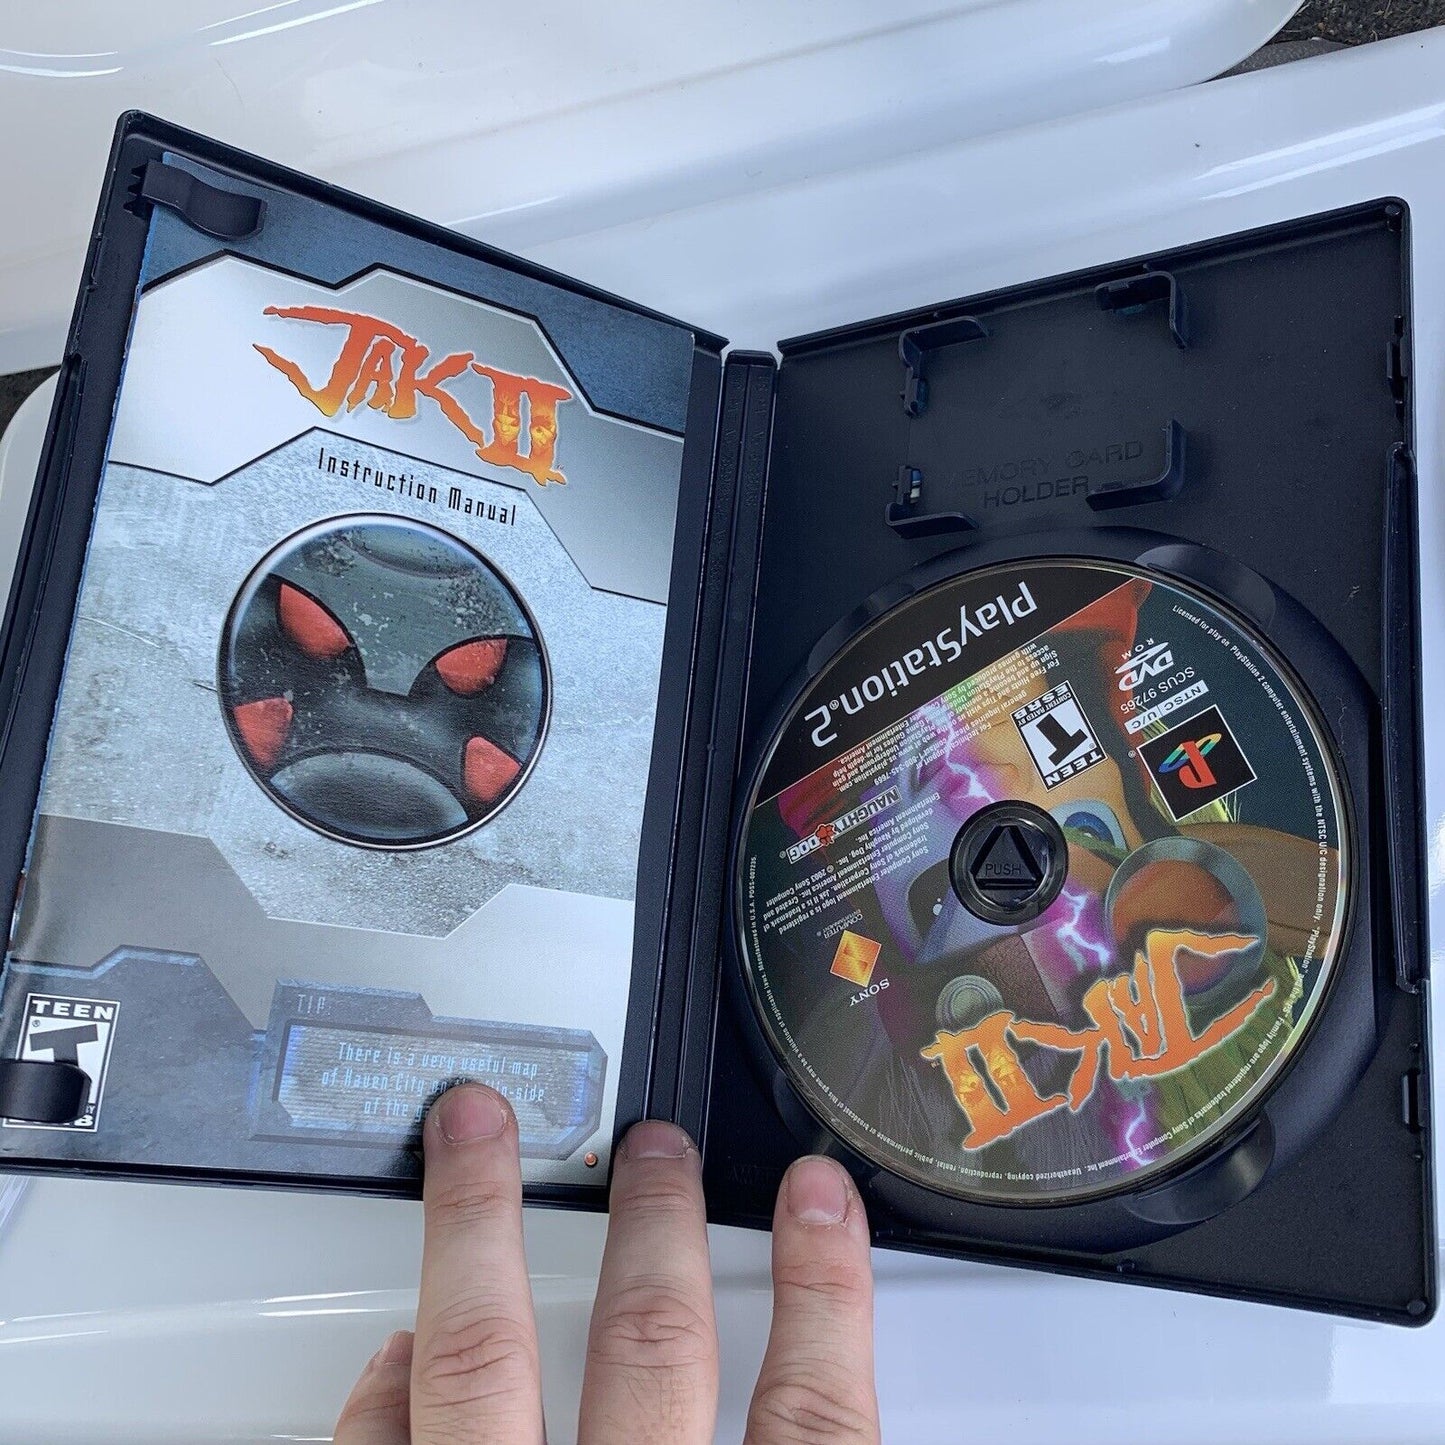 Jak II 2 Black Label (Sony PlayStation 2, 2003) PS2 Complete With Manual CIB